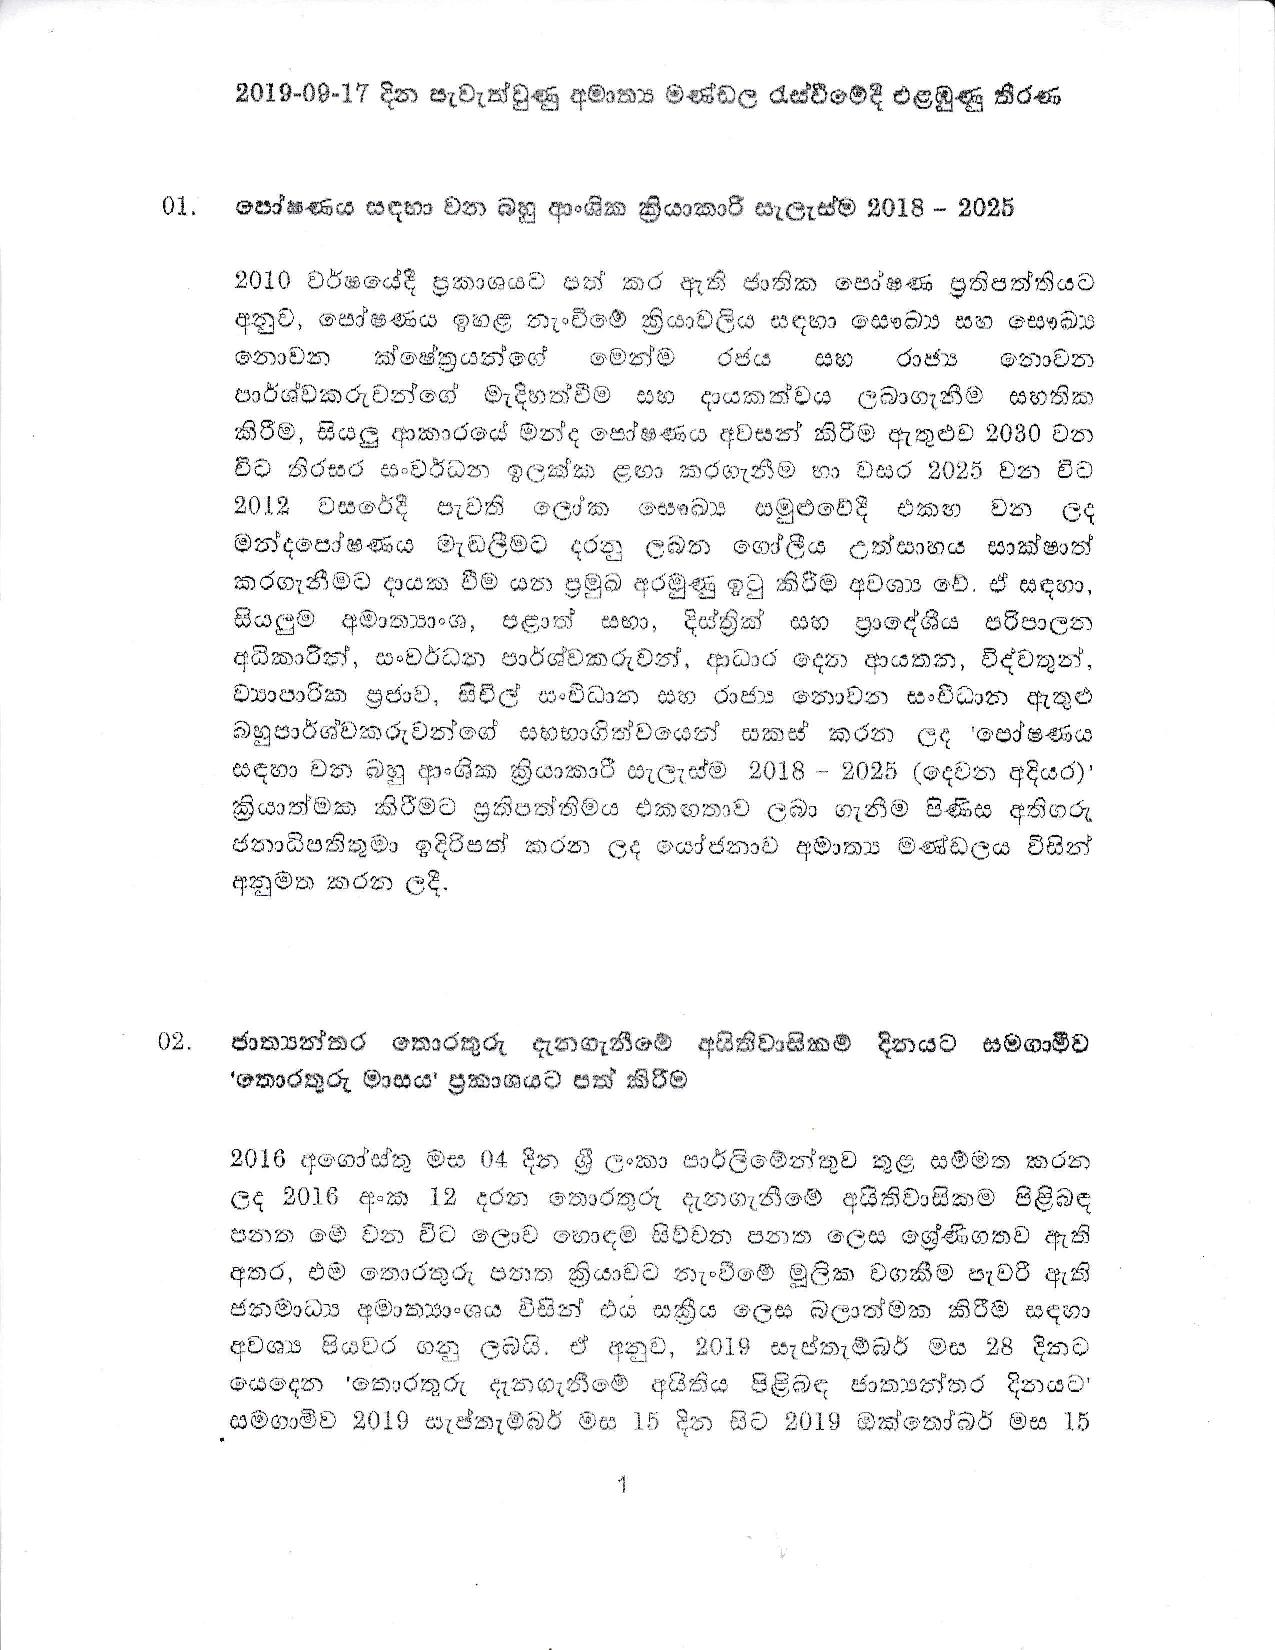 Cabinet Decision on 17.09.2019 Full document page 001